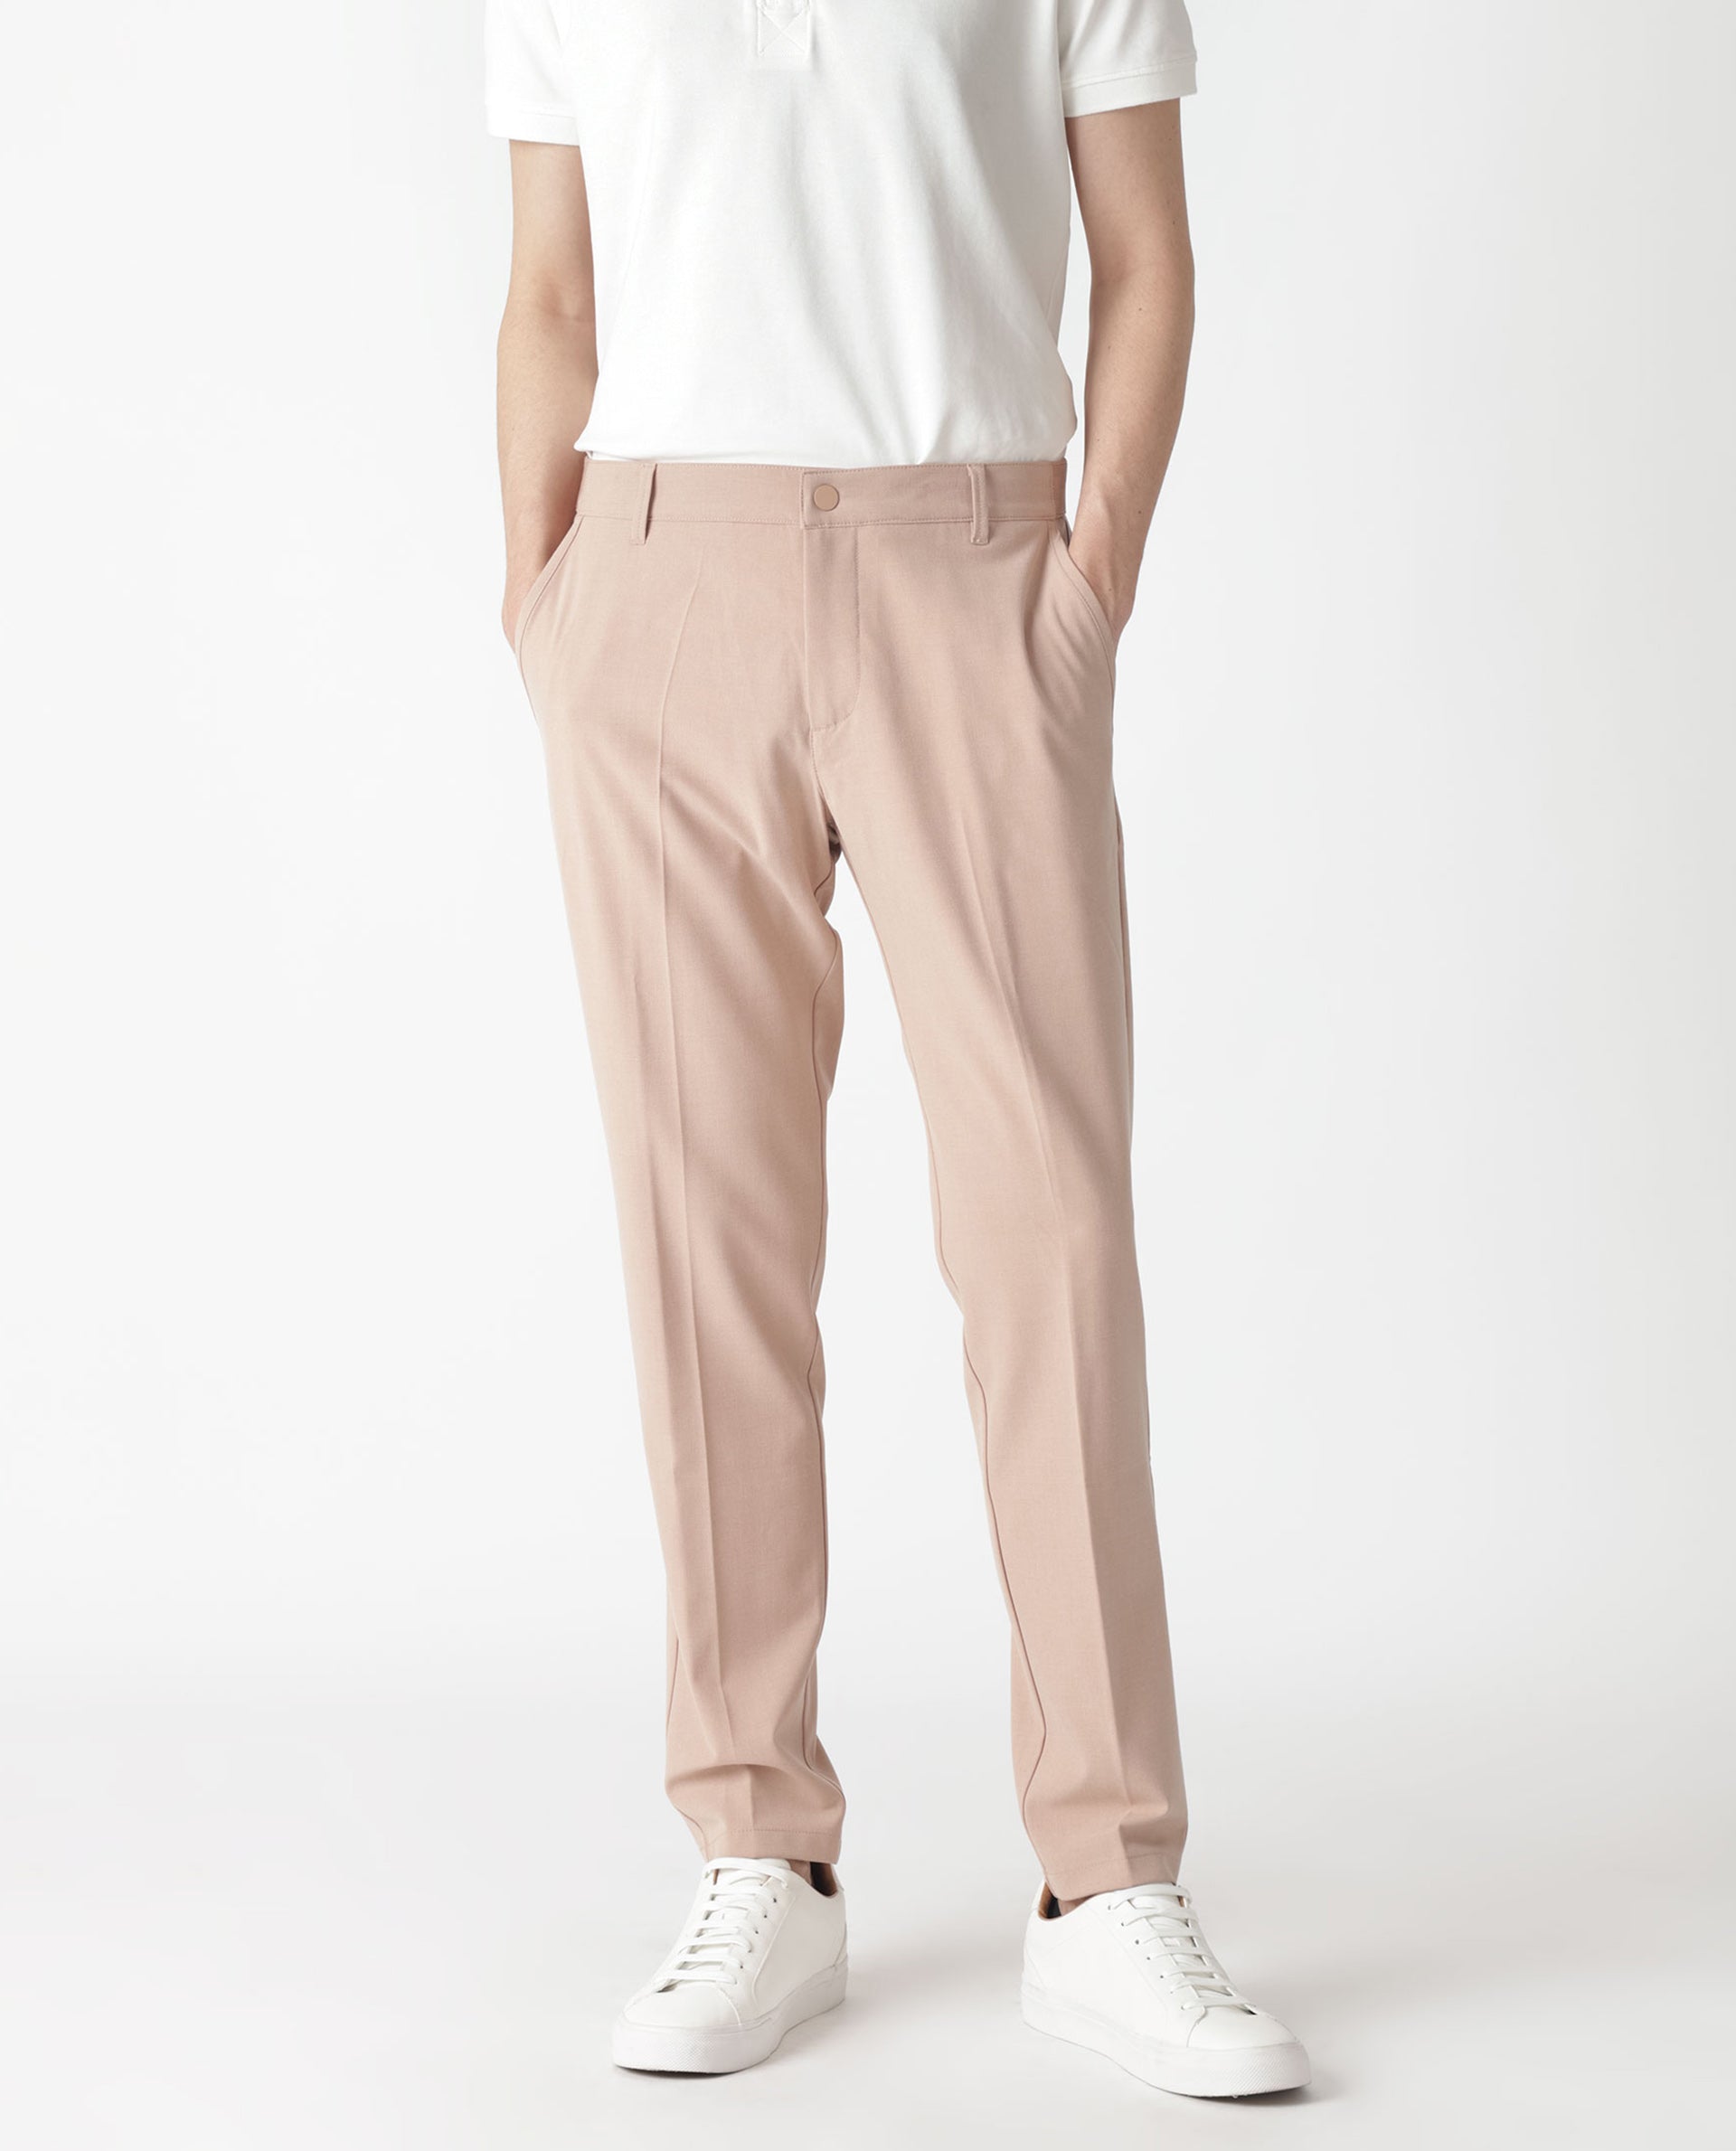 desire home slim fit men formal pants viscose rayon trousers pink light  formal trousers